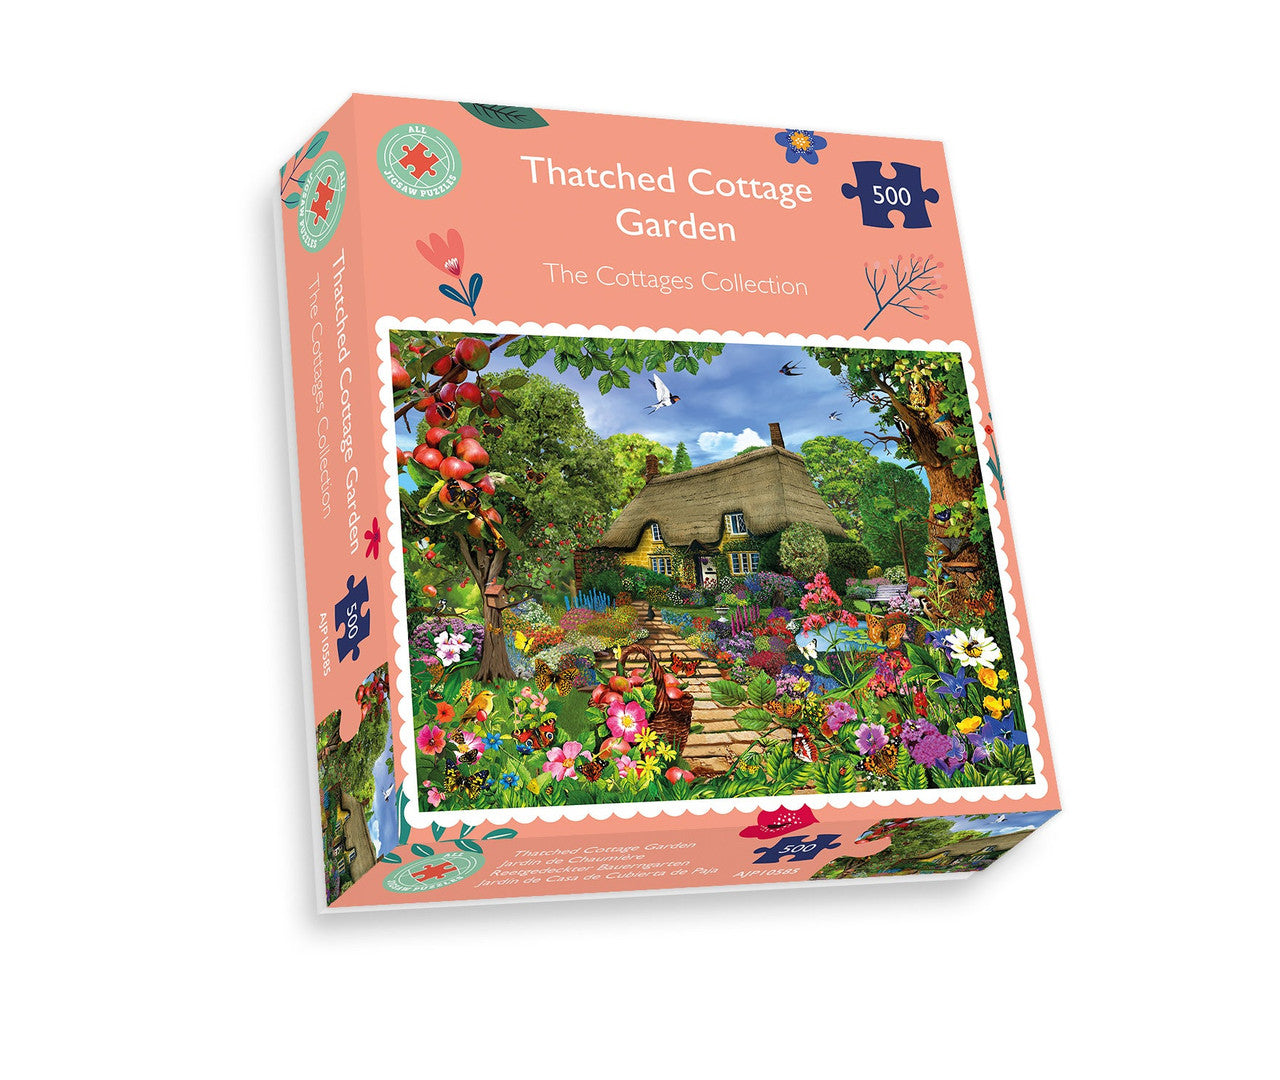 The Thatched Cottage Garden 500 Piece Jigsaw Puzzle.